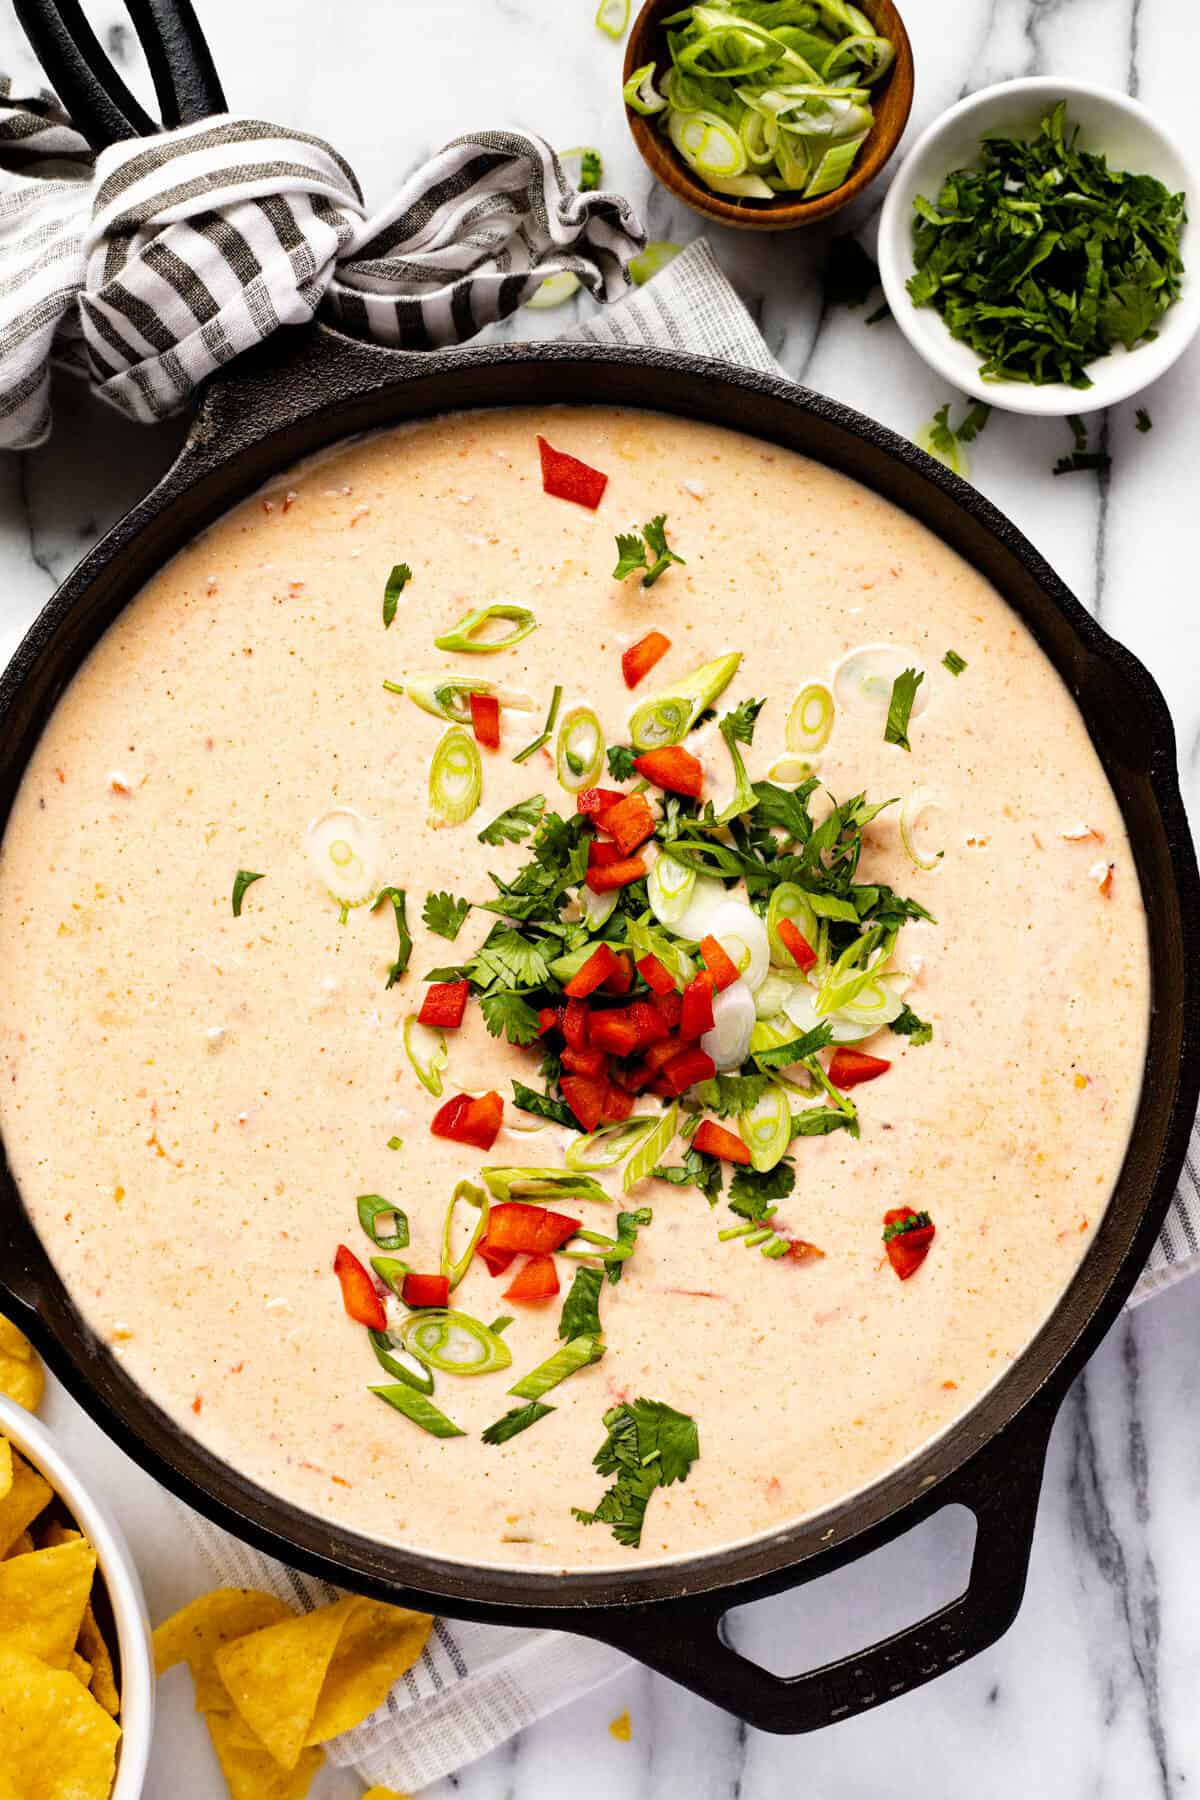 Large cast iron pan filled with homemade smoked queso dip garnished with green onion